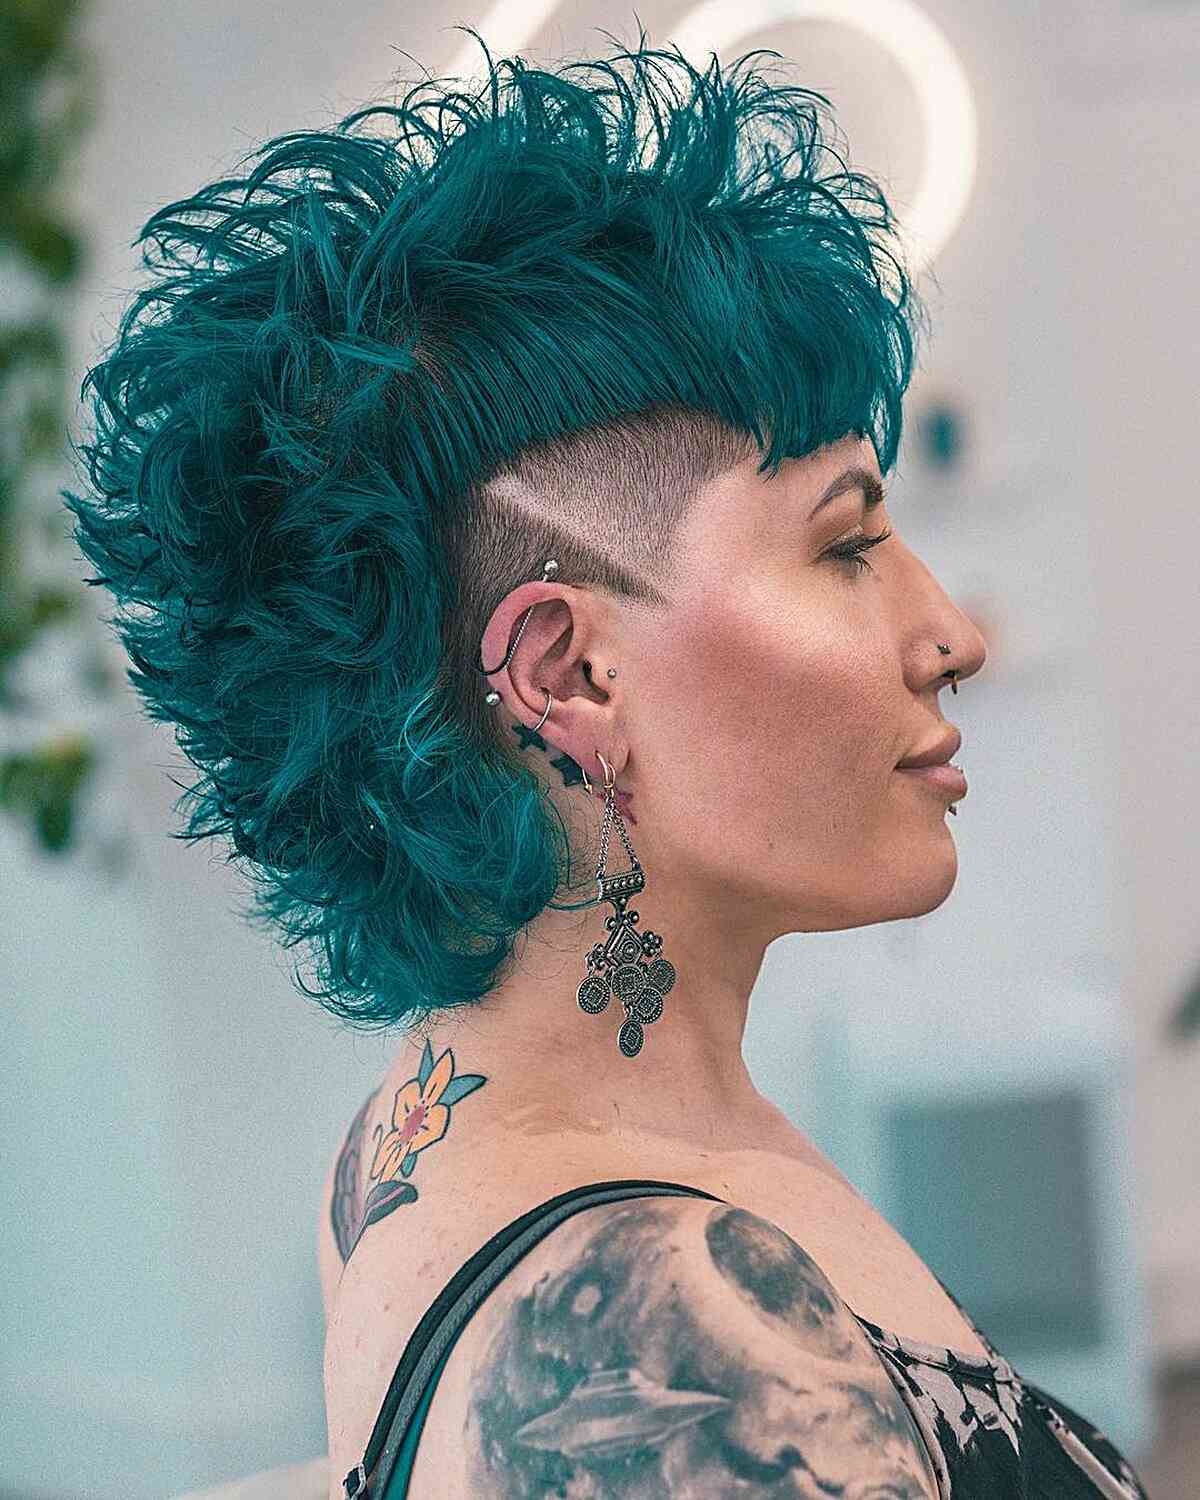 Punk Emerald Mullet with Shaved Designs Hairstyle